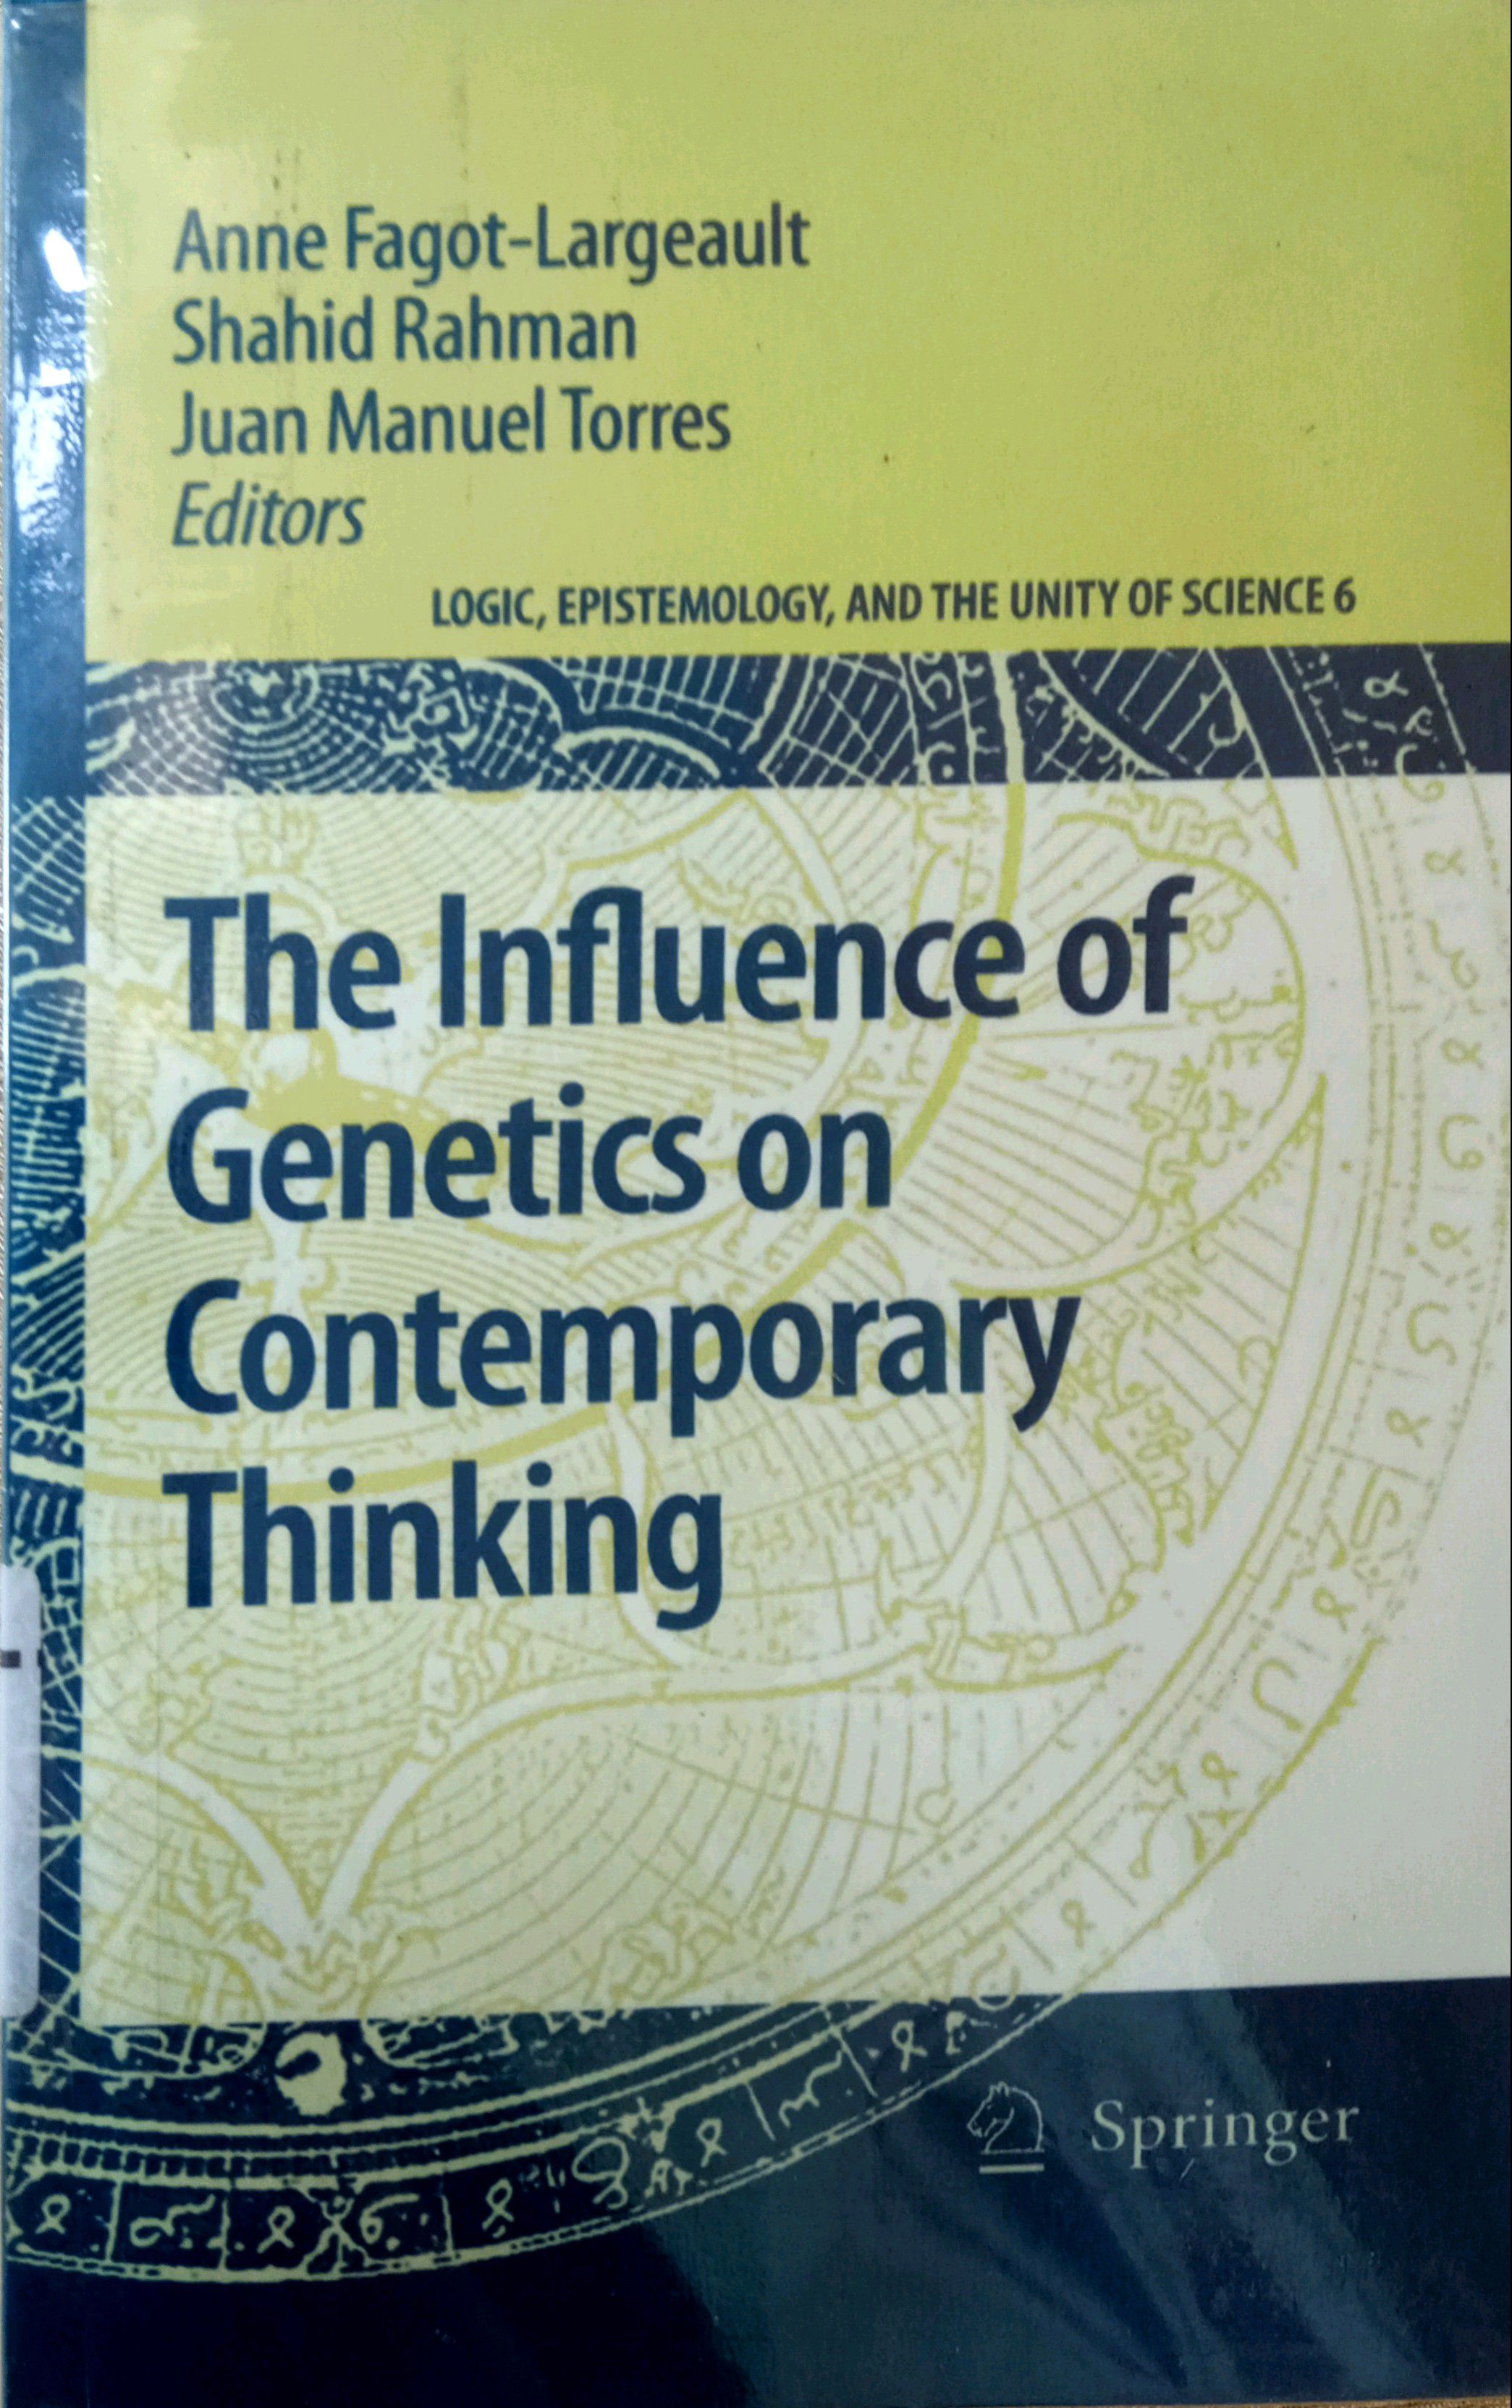 THE INFLUENCE OF GENETICS ON CONTEMPORARY THINKING